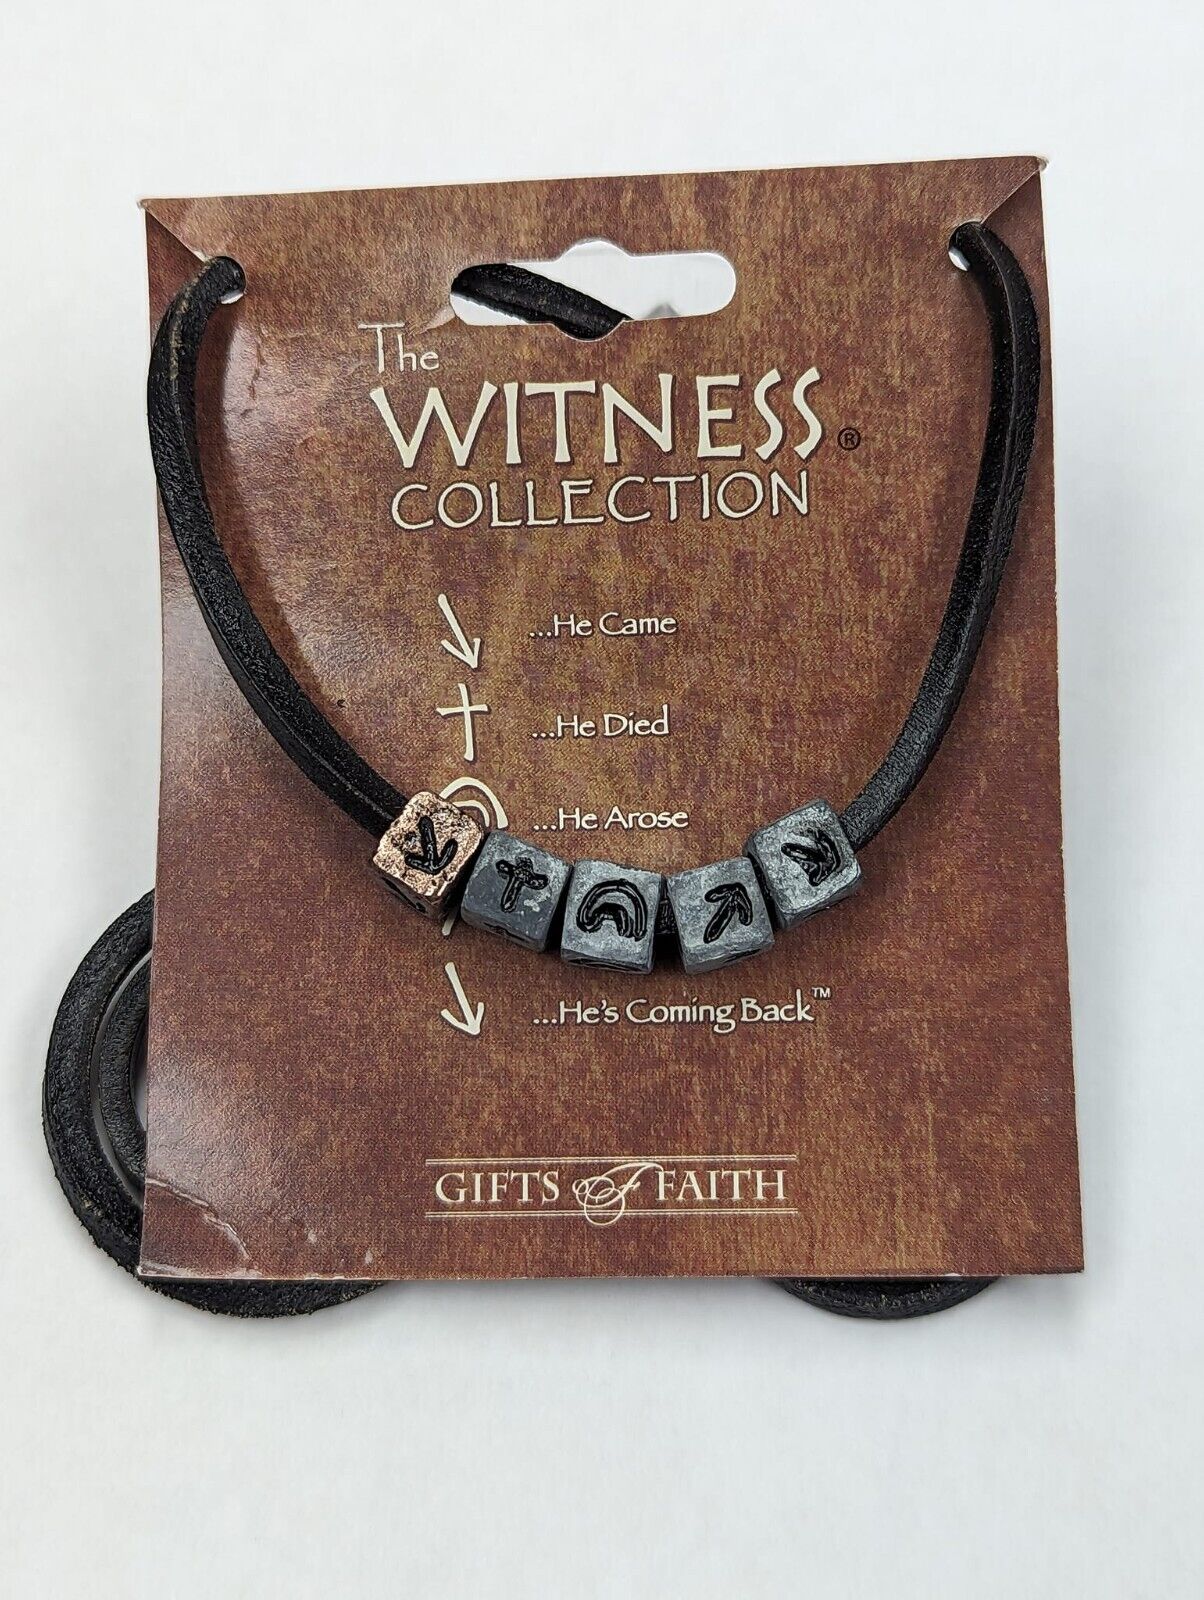 Witness NECKLACE - HE Came HE Died HE Arose HE Ascended HE'S Coming back